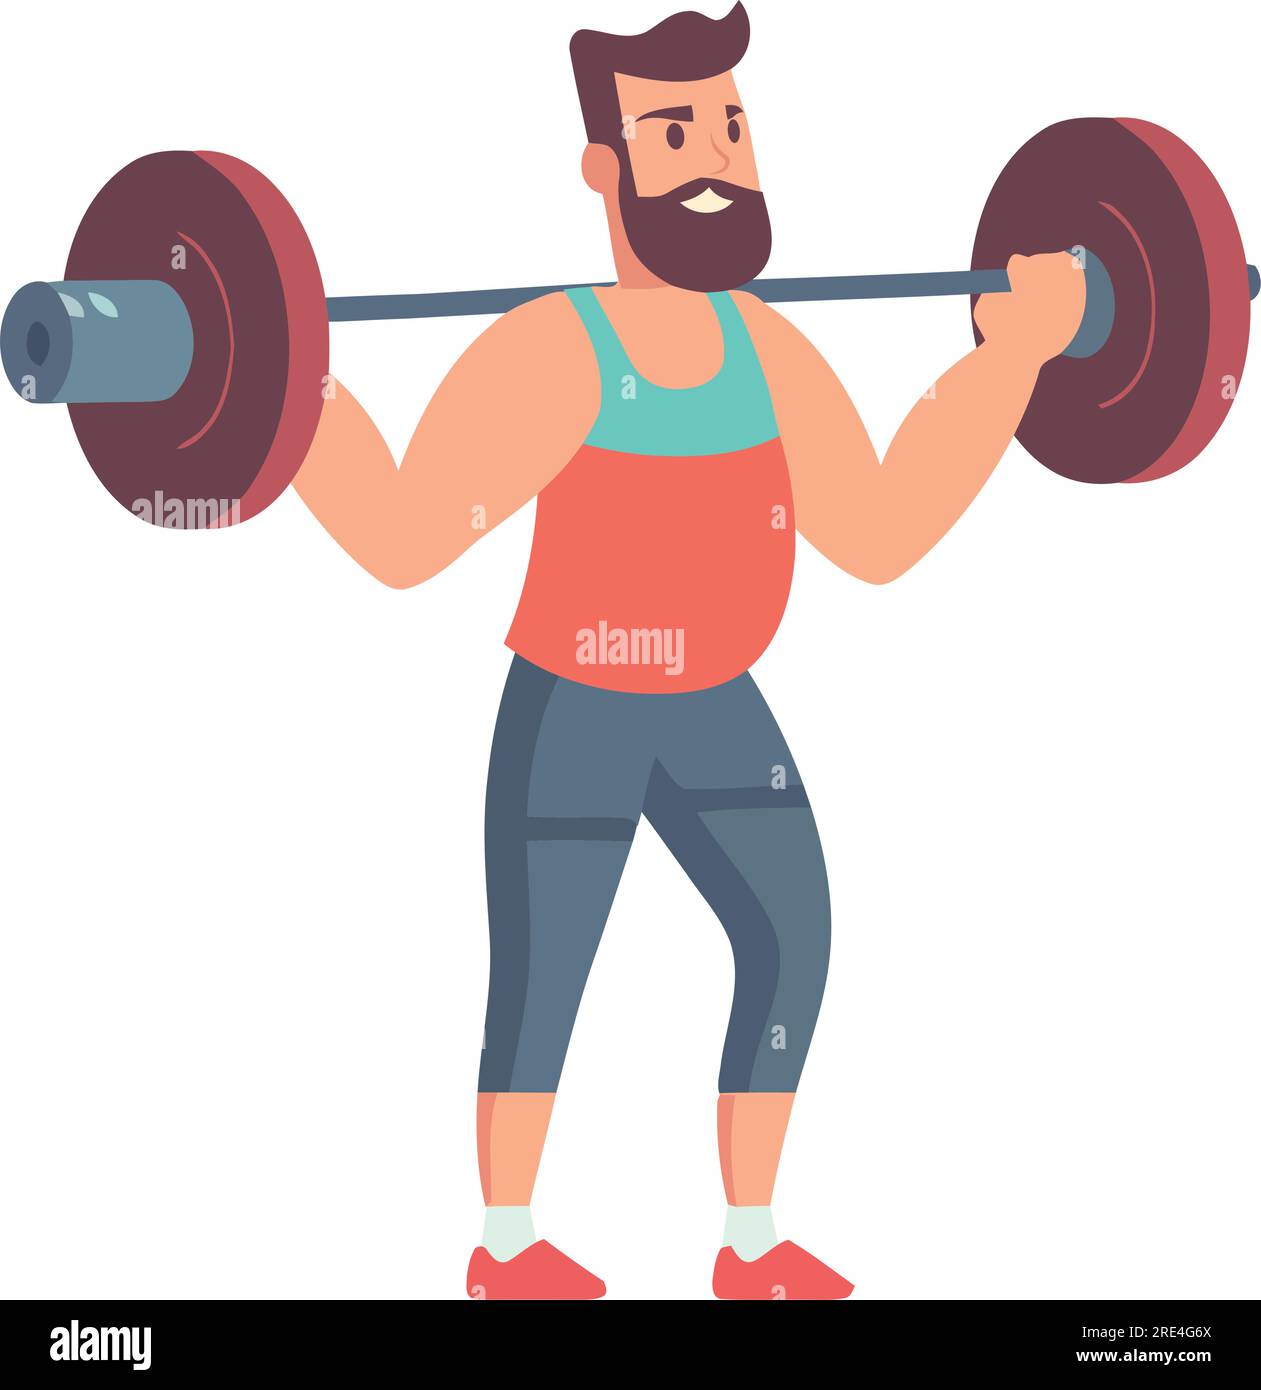 Weight lifter olympic Black and White Stock Photos & Images - Alamy